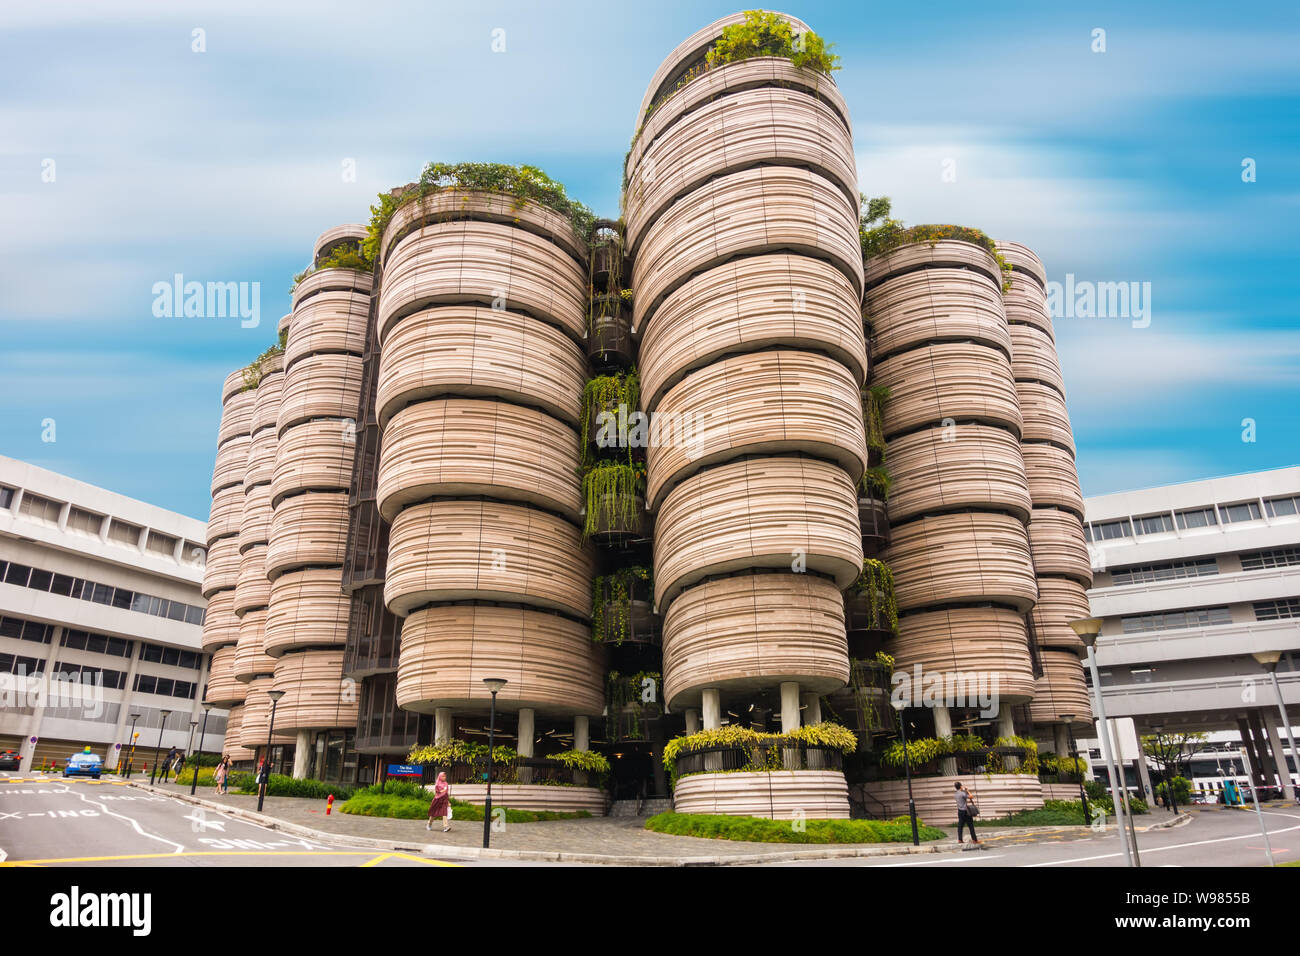 SINGAPORE - OCTOBER 24, 2016: Modern Architectural Building of Nanyang Technological University in Singapore. Cityscape Landmark of Contemporary Stock Photo